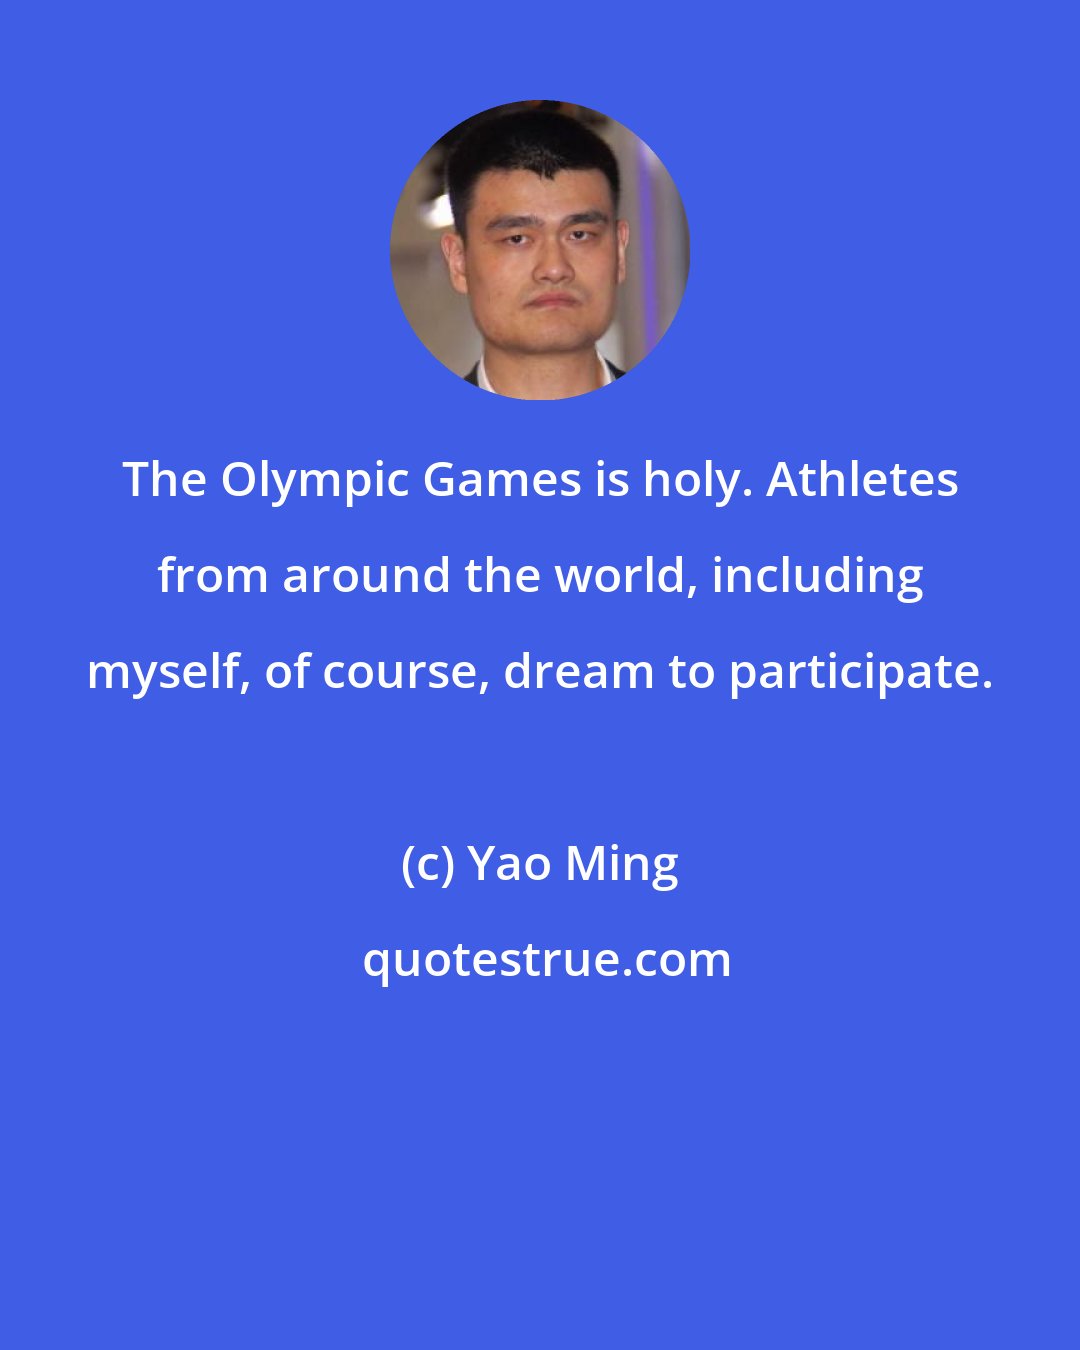 Yao Ming: The Olympic Games is holy. Athletes from around the world, including myself, of course, dream to participate.